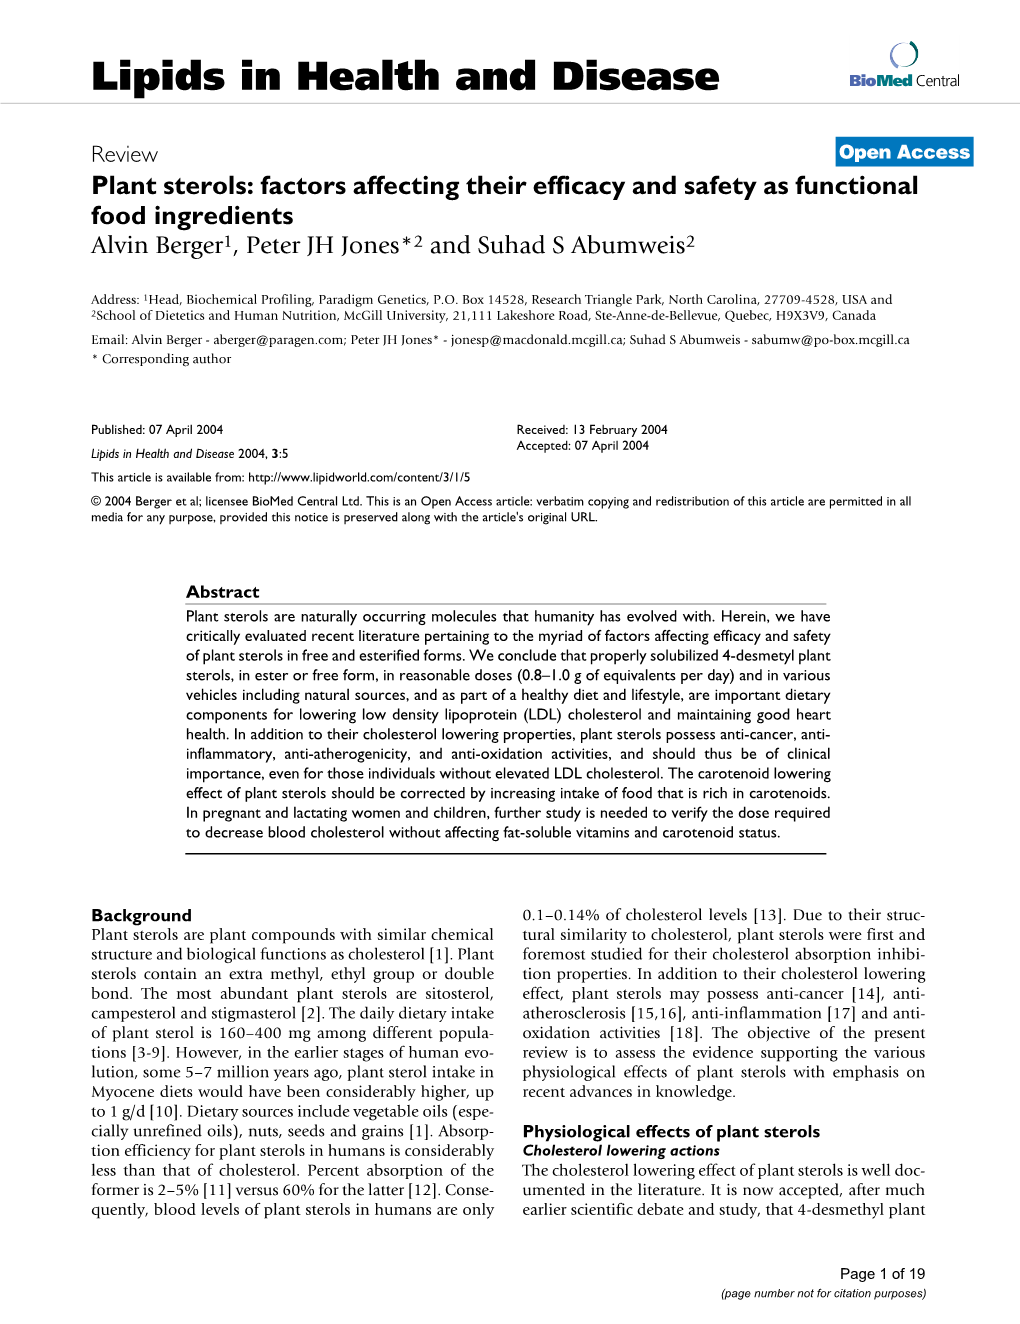 Plant Sterols: Factors Affecting Their Efficacy and Safety As Functional Food Ingredients Alvin Berger1, Peter JH Jones*2 and Suhad S Abumweis2